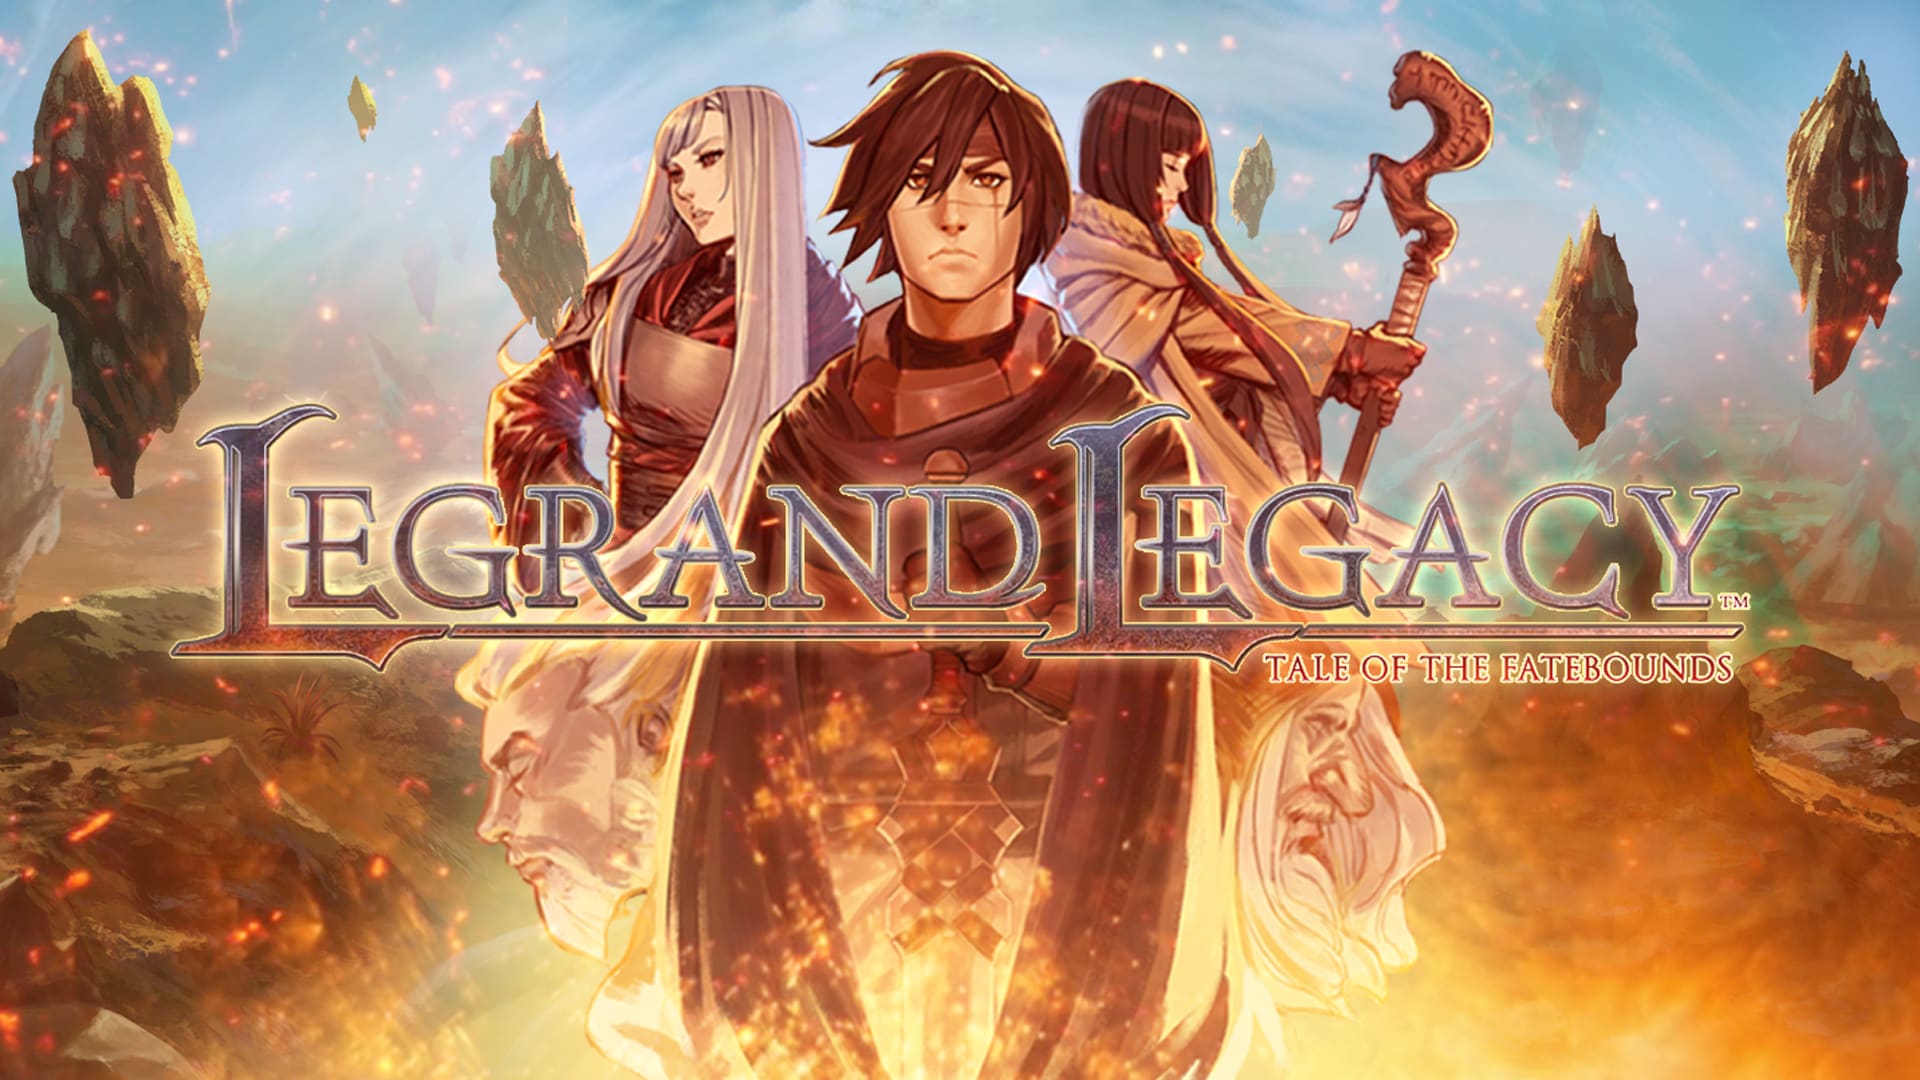 LEGRAND LEGACY: Tale of the Fatebounds 